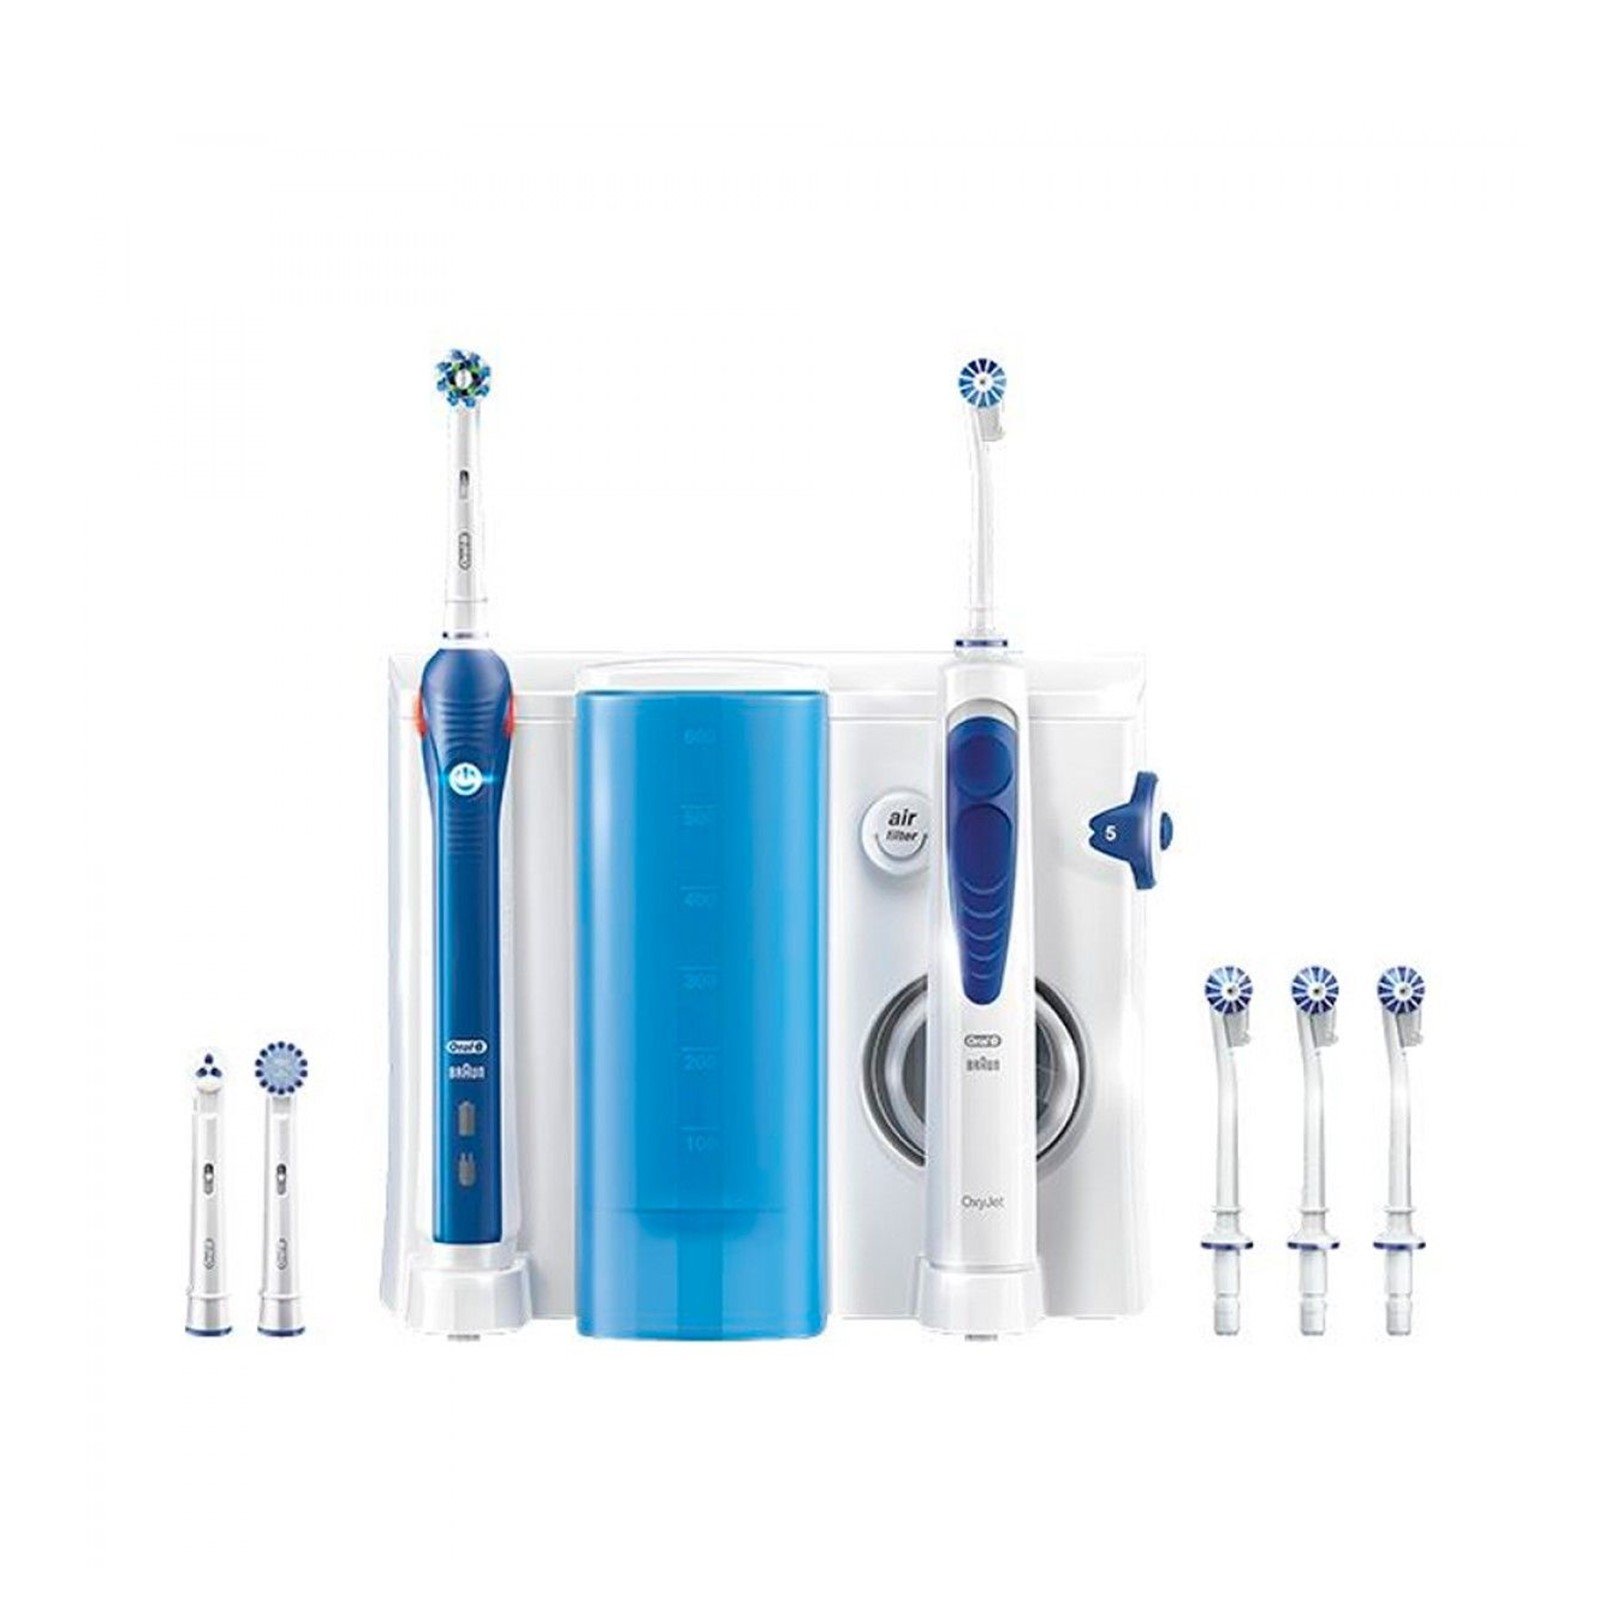 Sinis Pamflet Zelfgenoegzaamheid Buy PROMOTIONAL PACK:Oral-B Oxyjet Cleaning System + Pro 2000 Electric  Toothbrush · USA